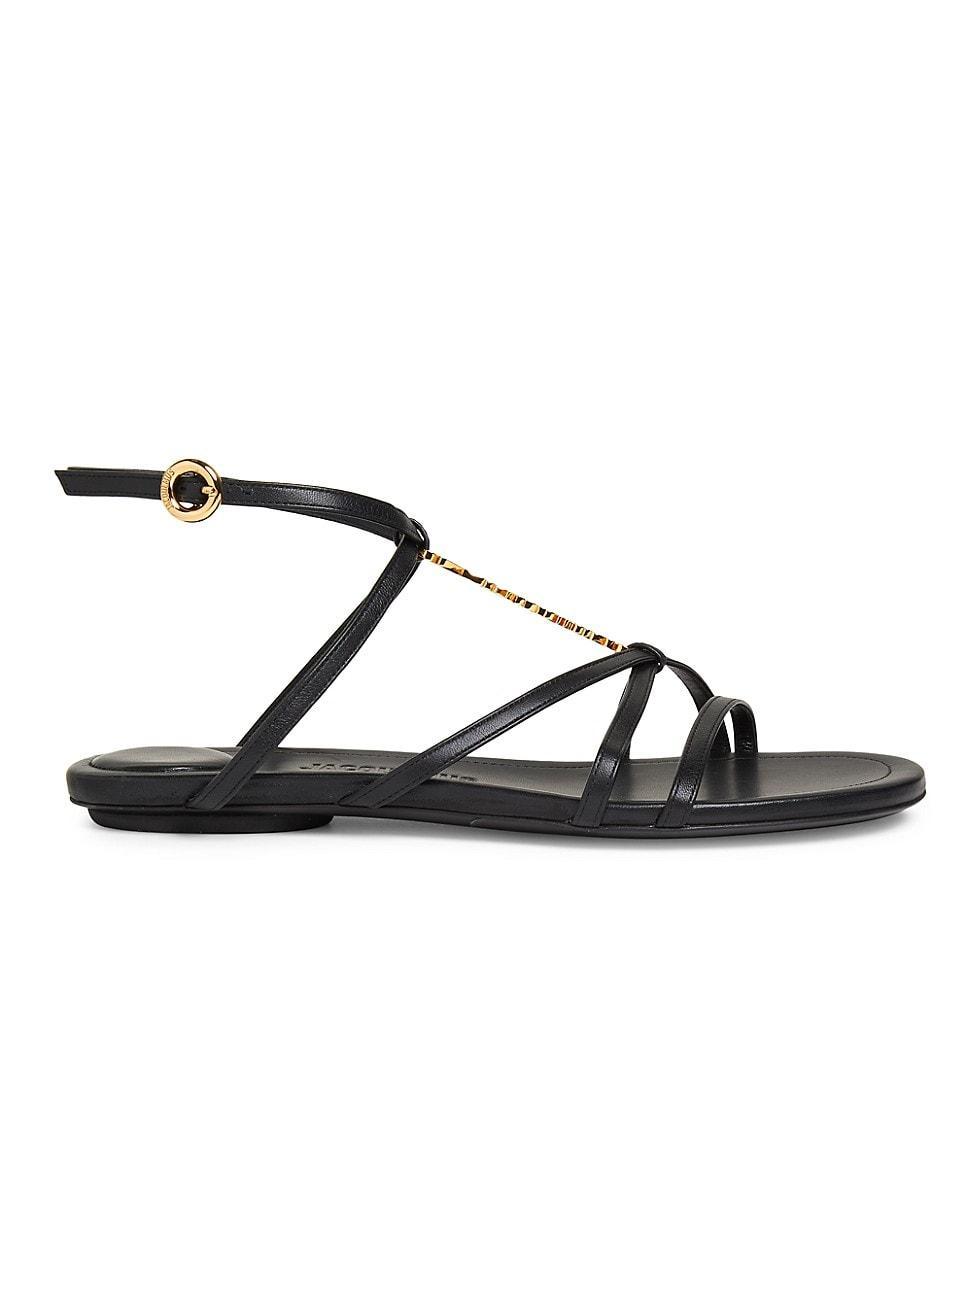 Womens Les Sandales Pralu Leather Ankle-Strap Sandals Product Image